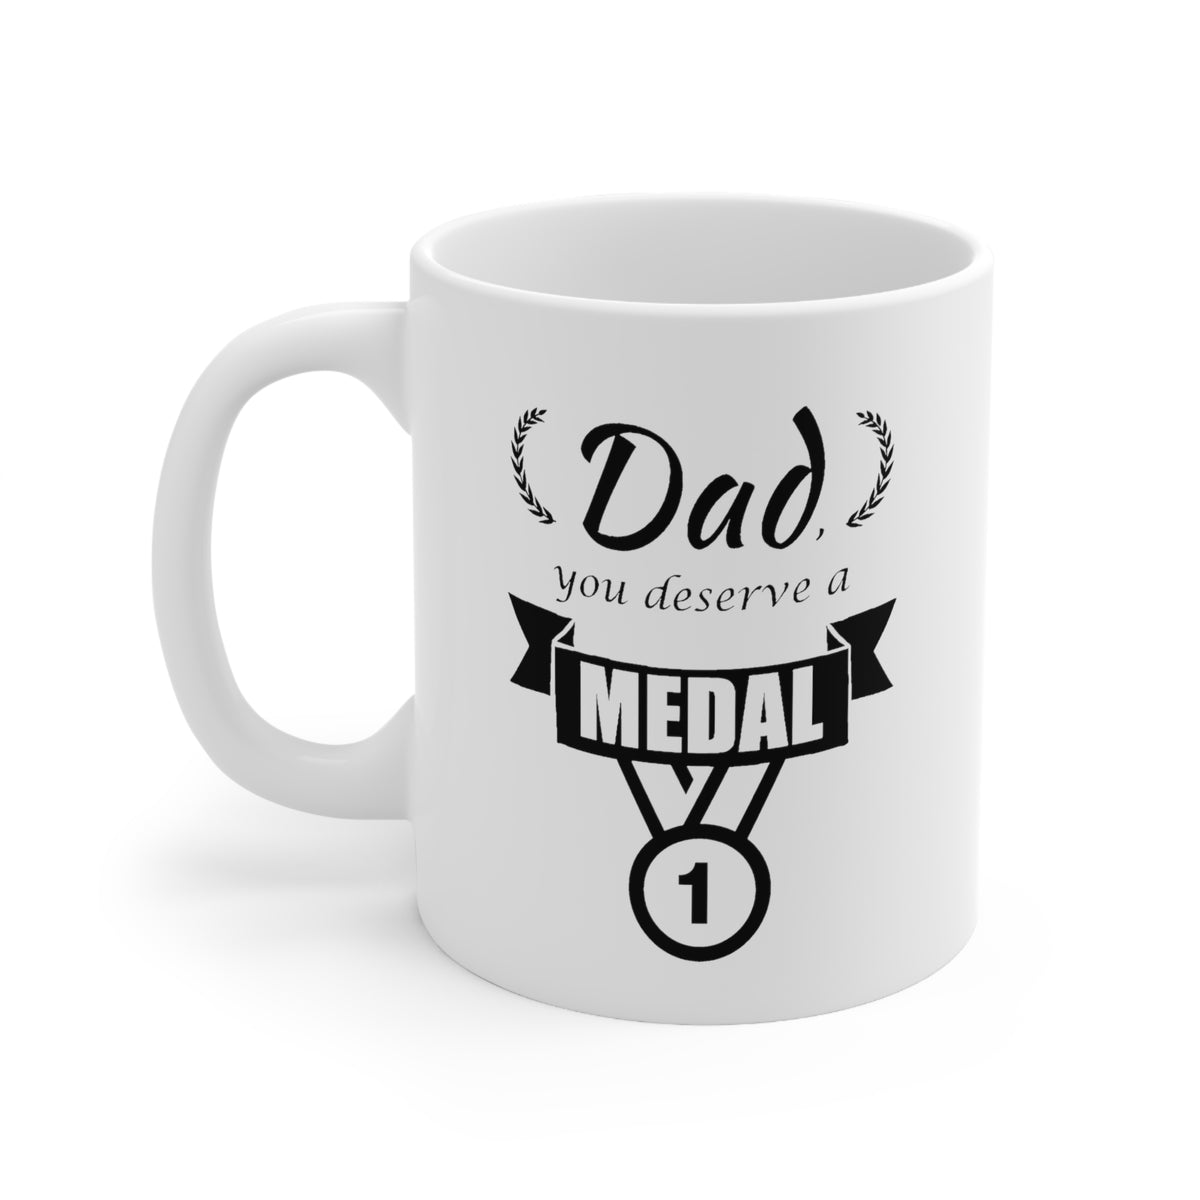 Father's Day Gifts - Dad, You Deserve A Medal - Perfect Mugs For Best Dad